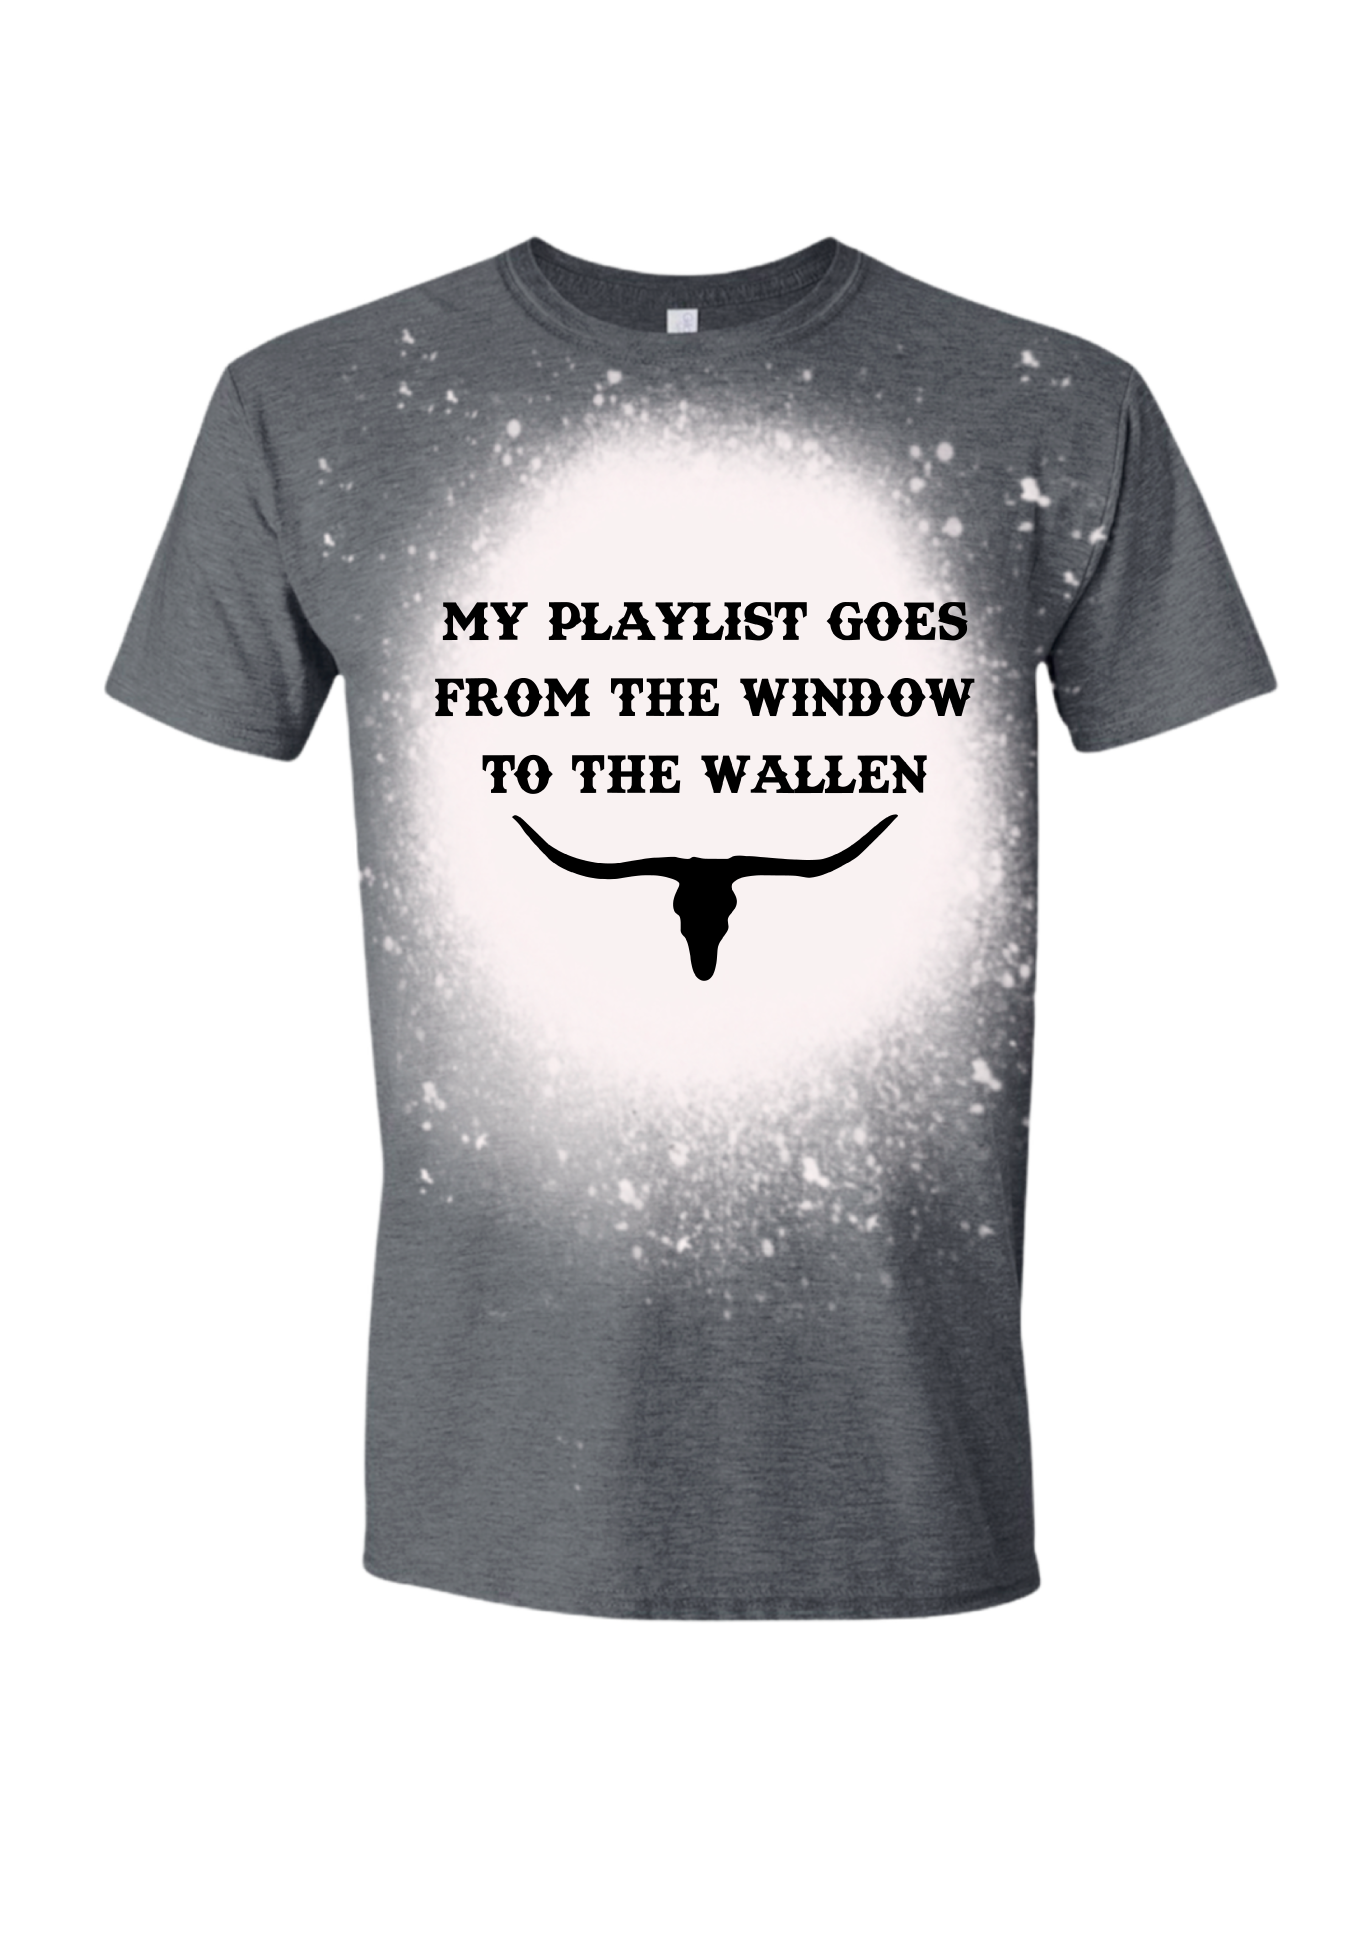 From The Window to the Wallen Bleached Tee